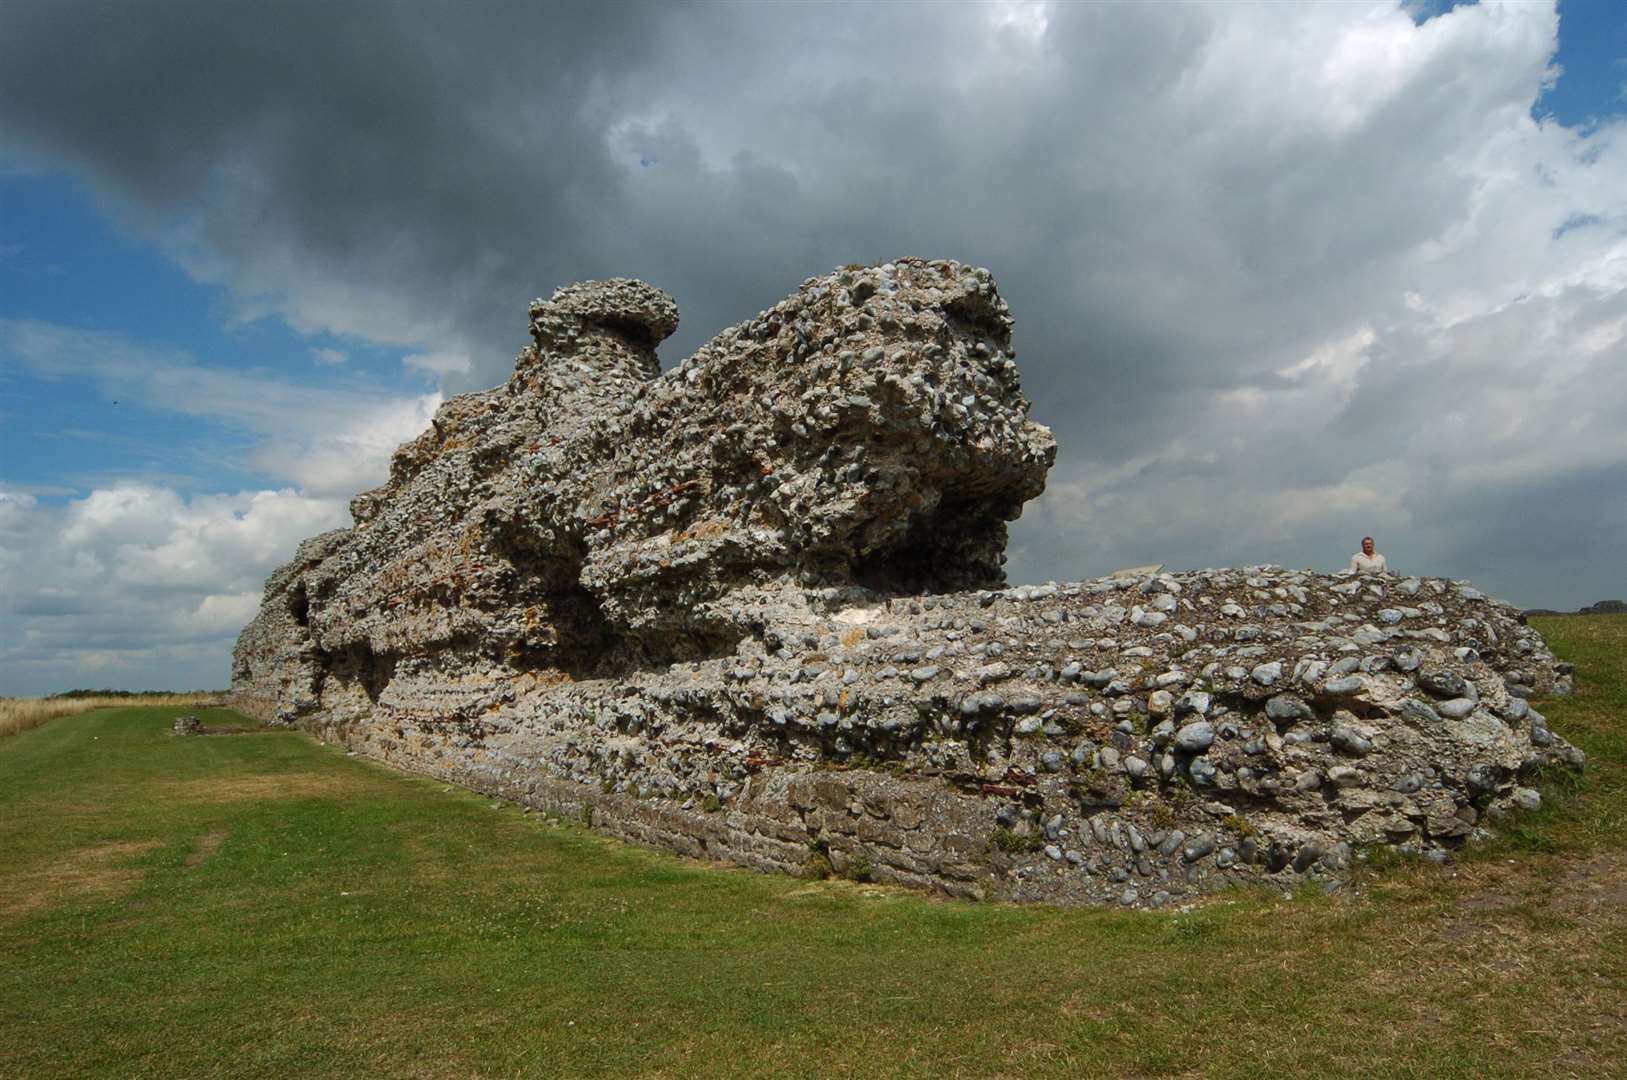 The remains of the Richborough Roman fort can still be seen today